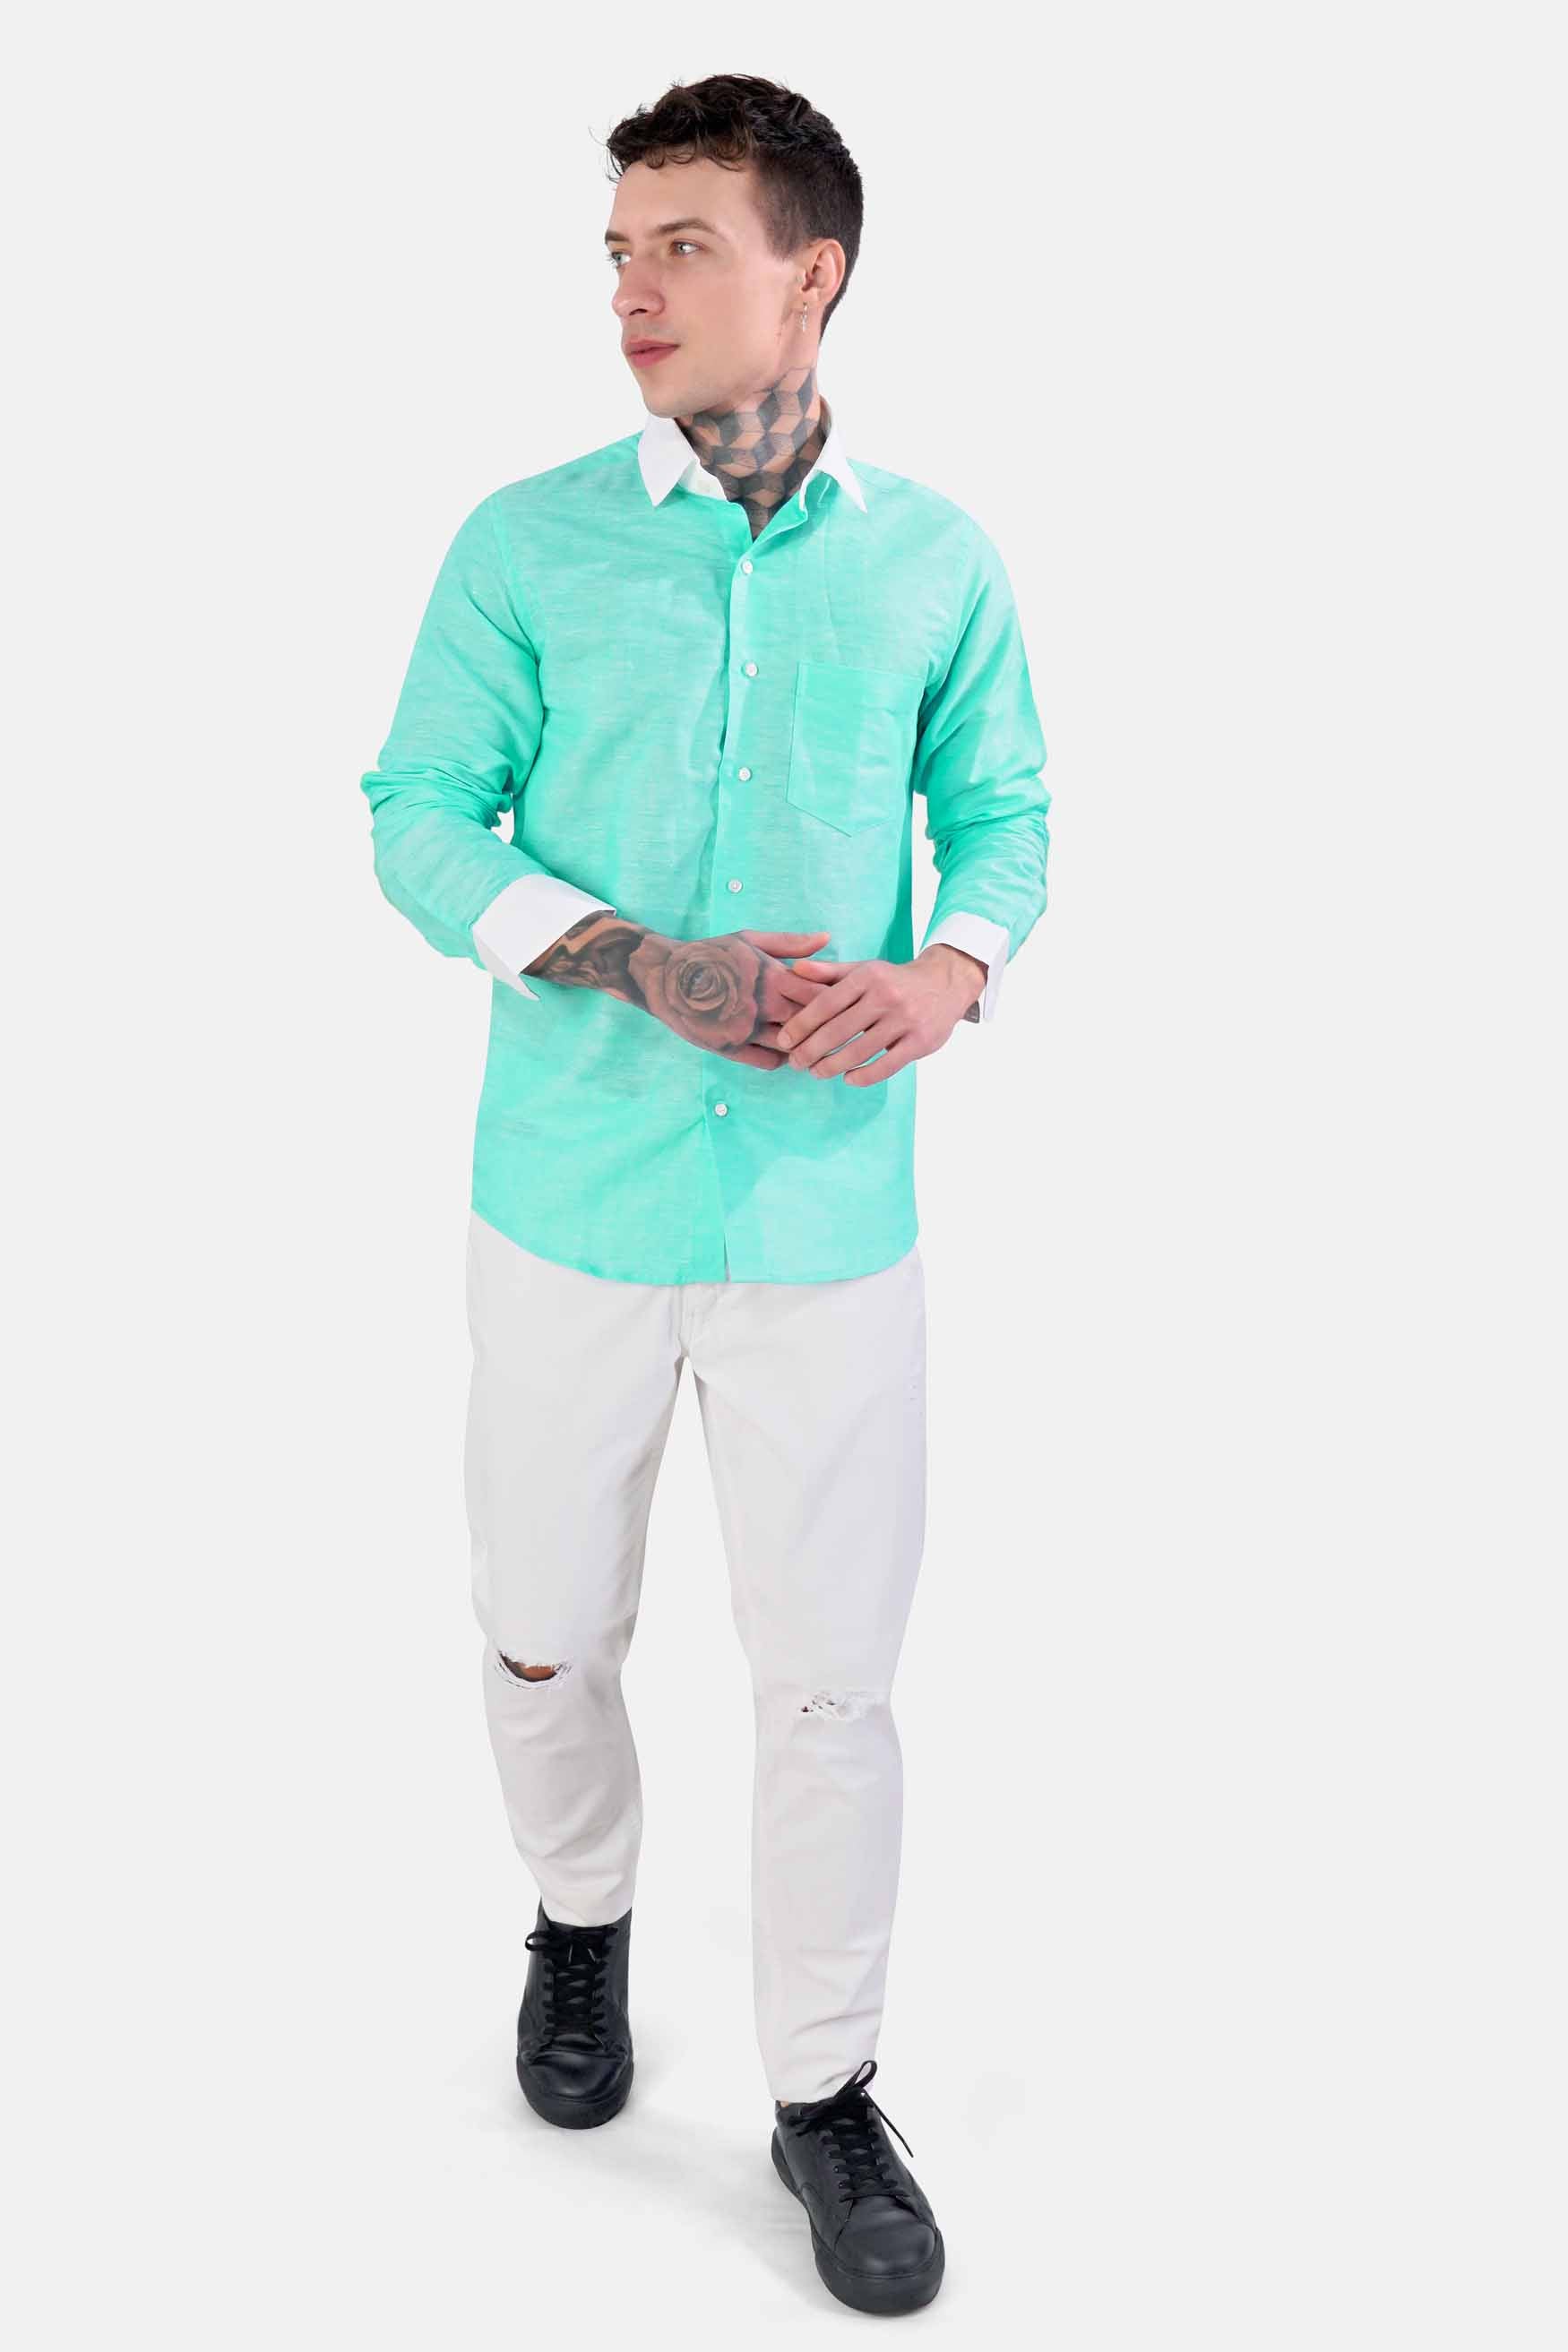 Turquoise Blue with White Cuffs and Collar Luxurious Linen Shirt